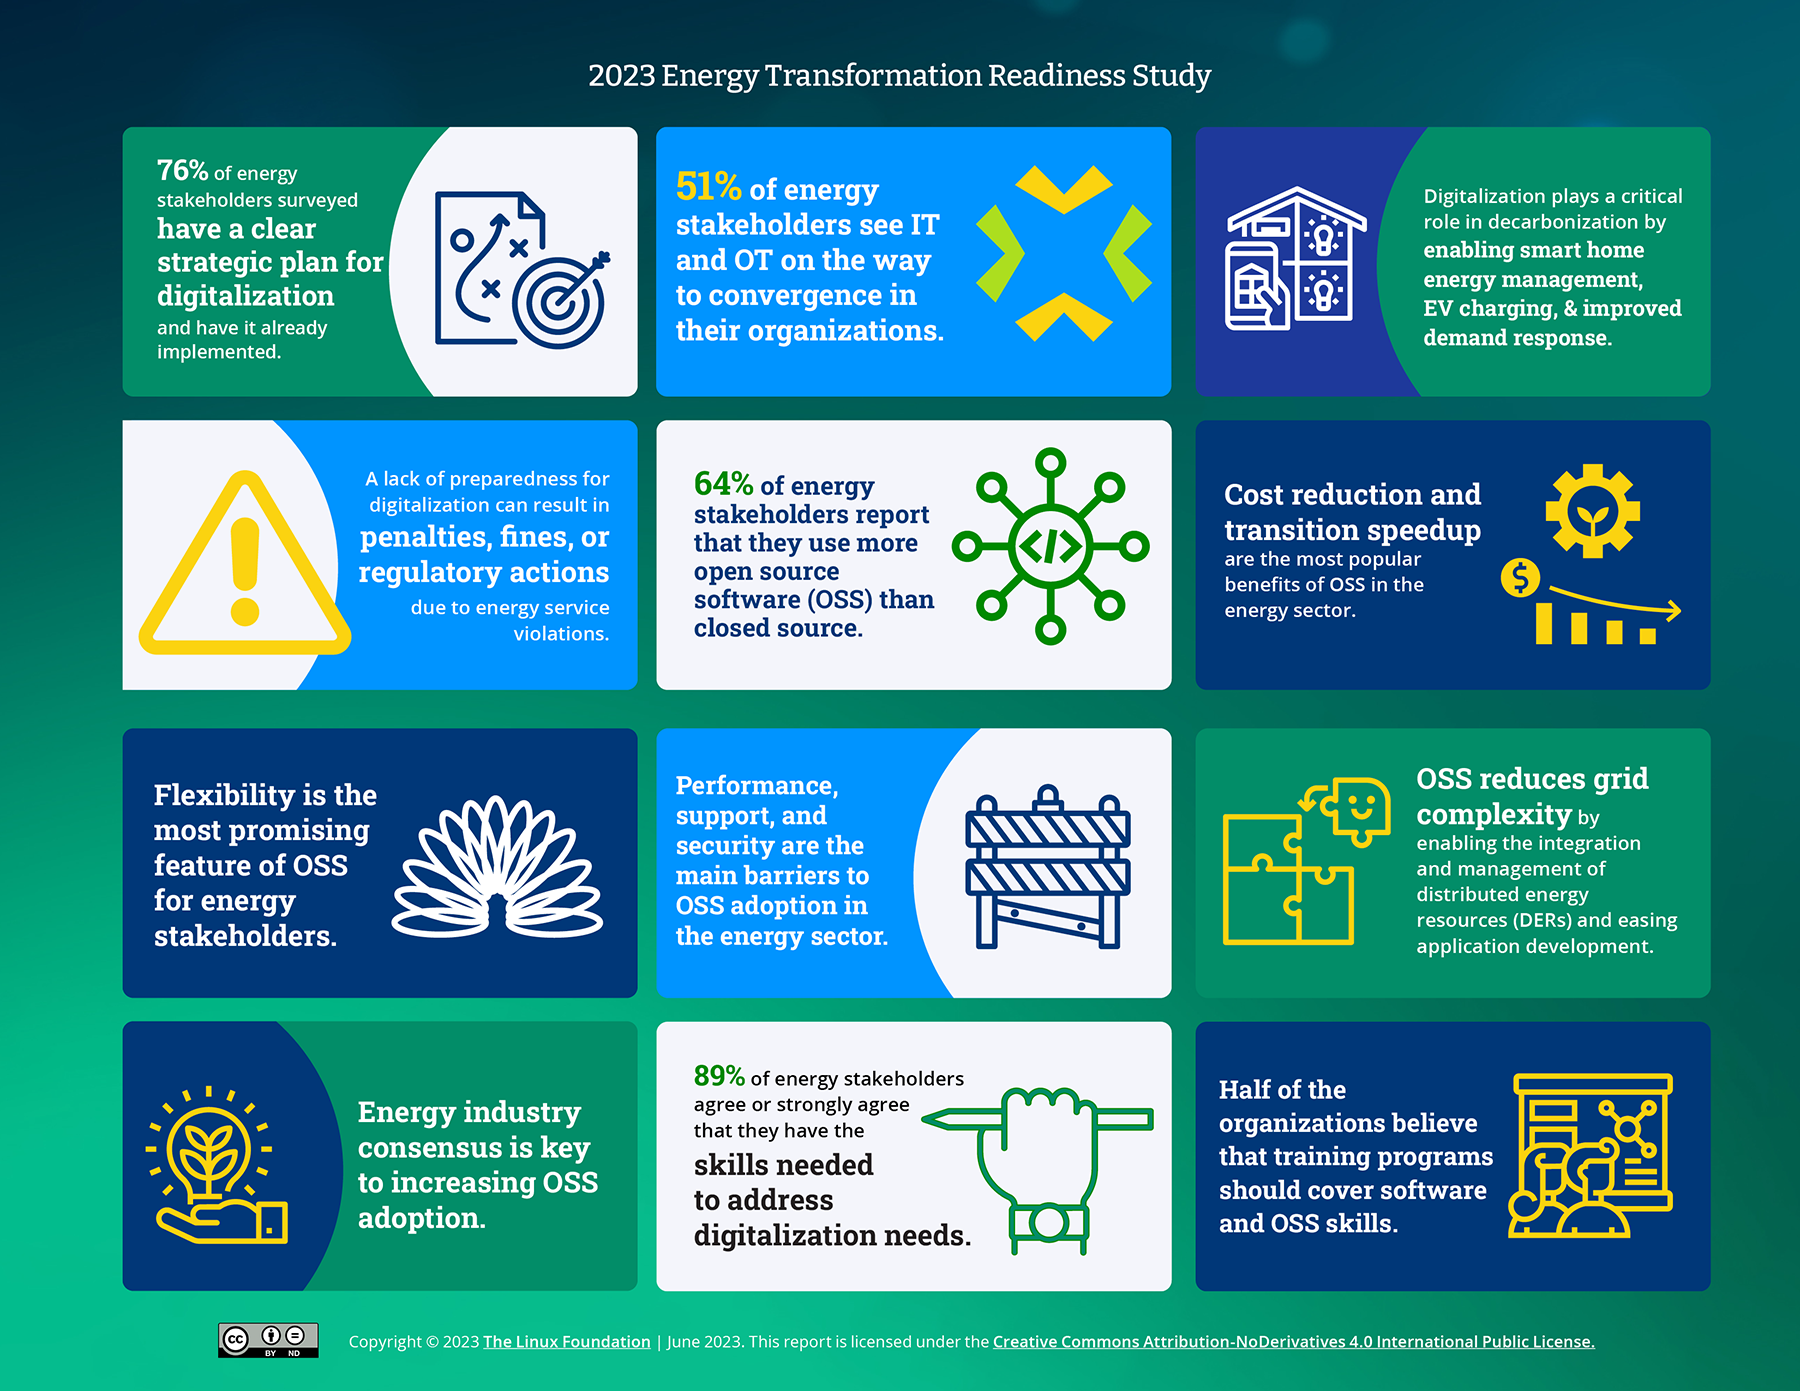 2023 Energy Transformation Readiness Study Featured Image 2